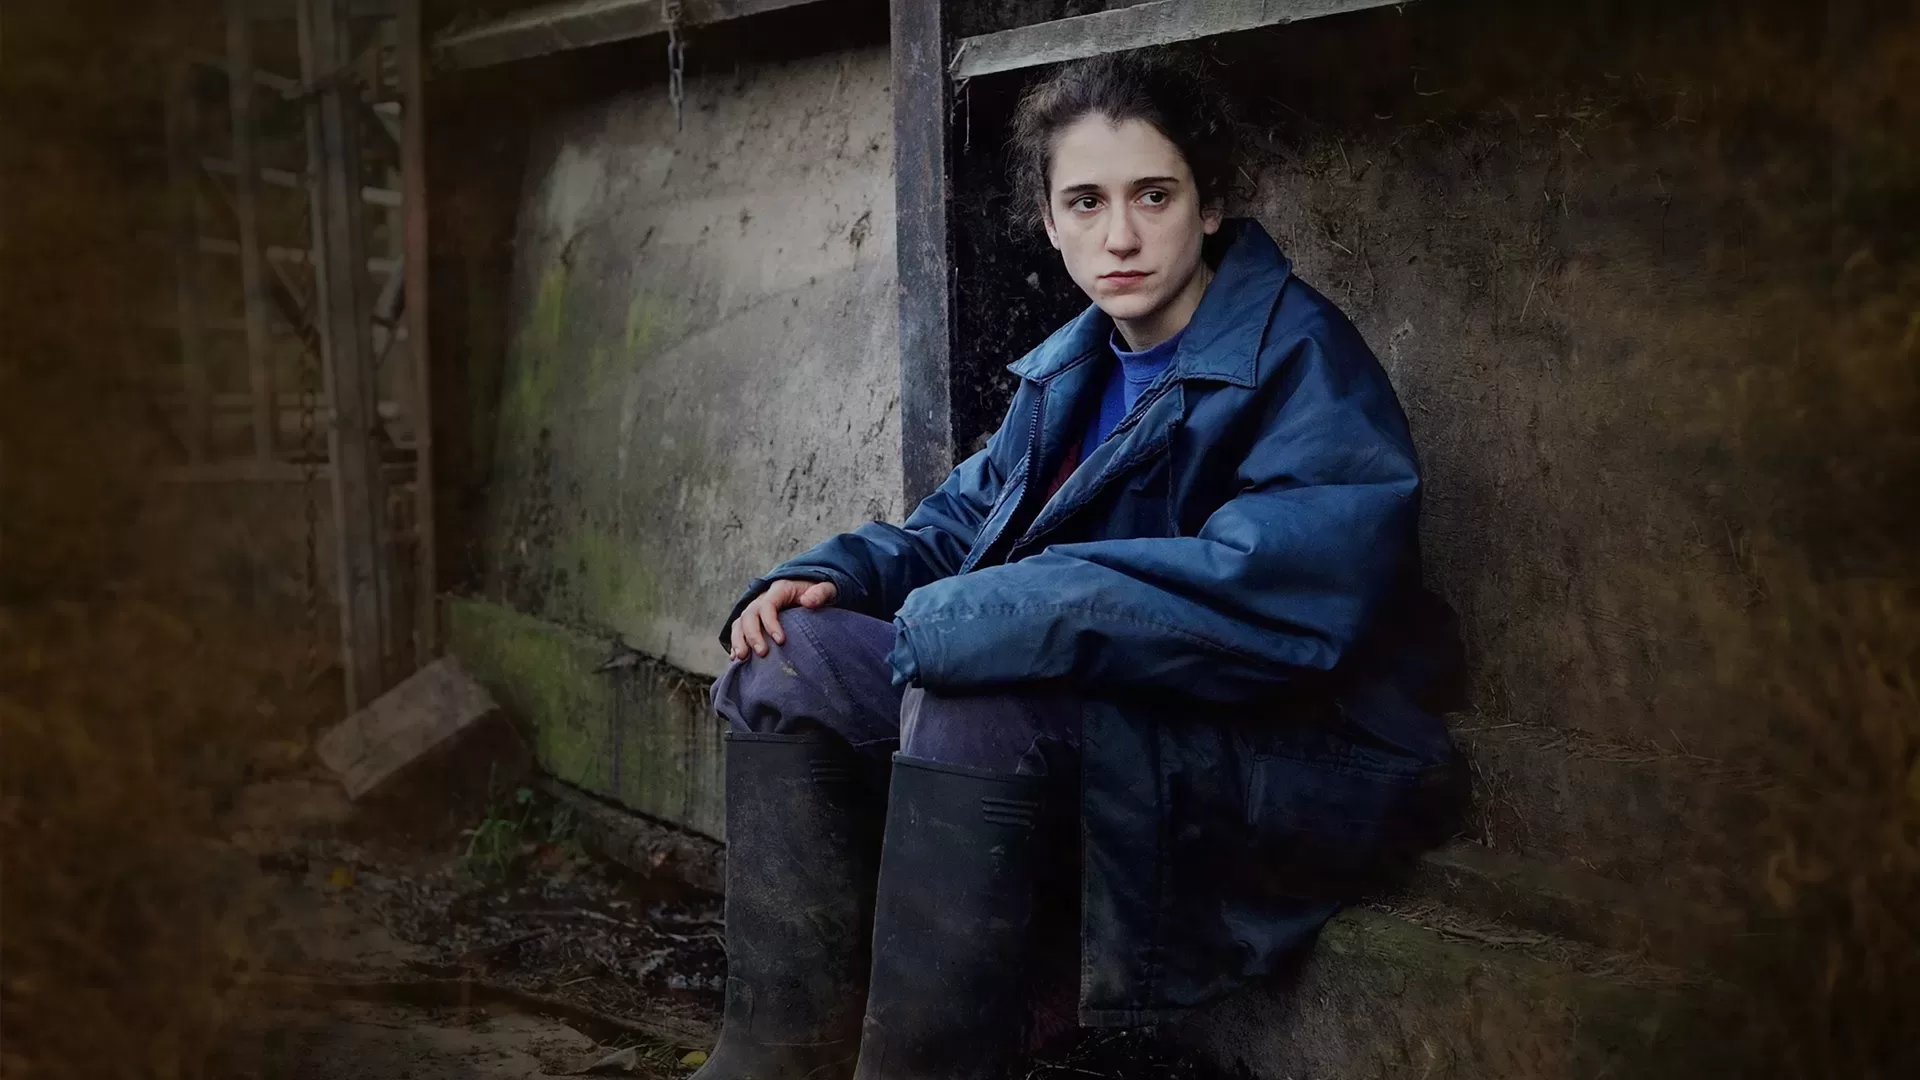 The Levelling is a British farm film